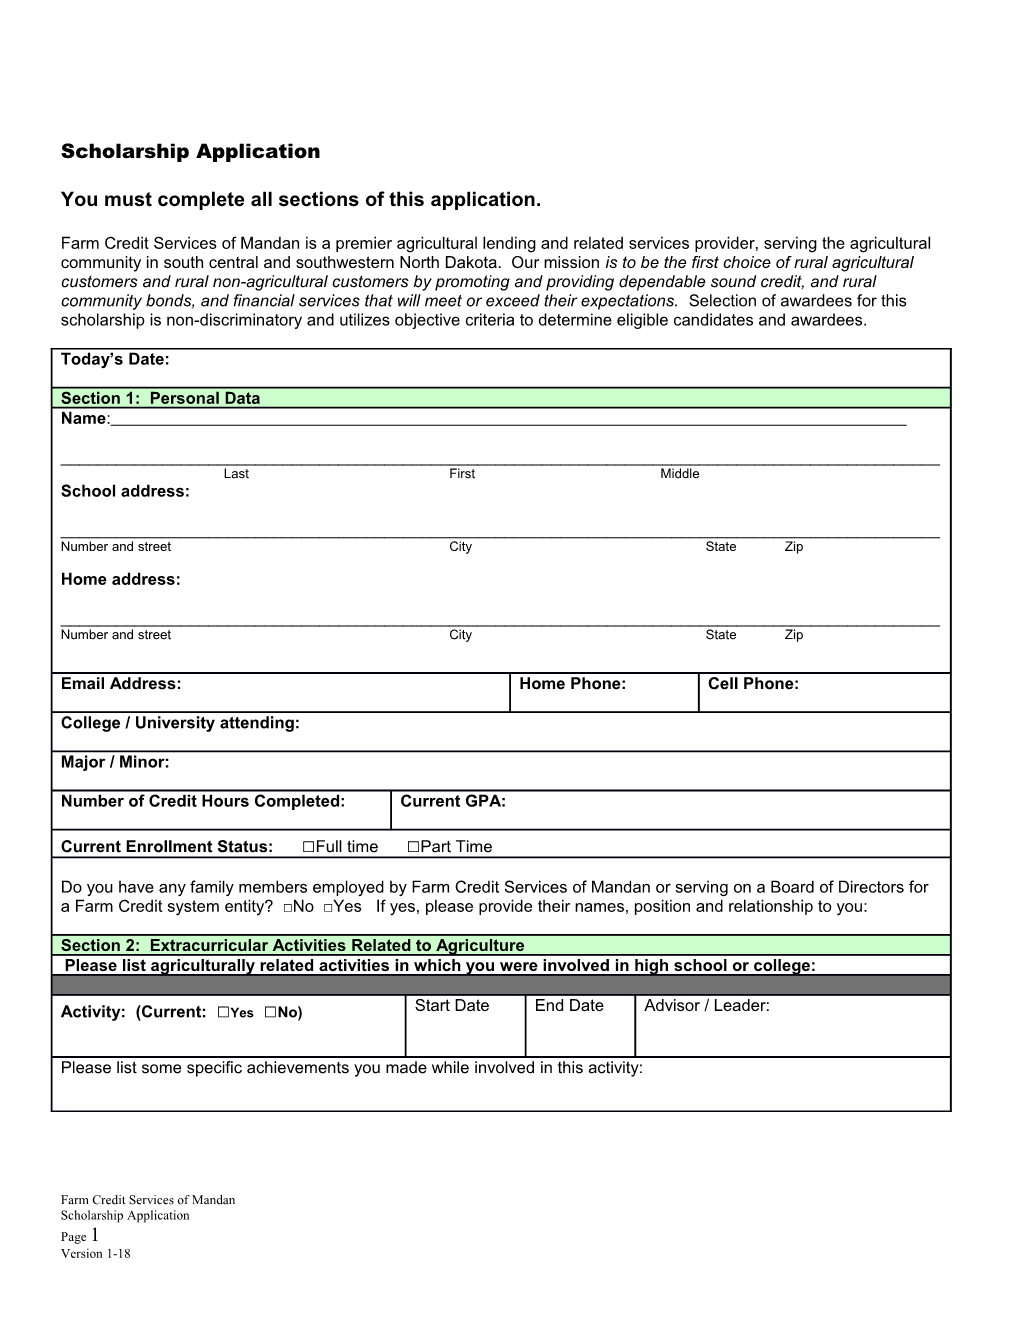 You Must Complete All Sections of This Application